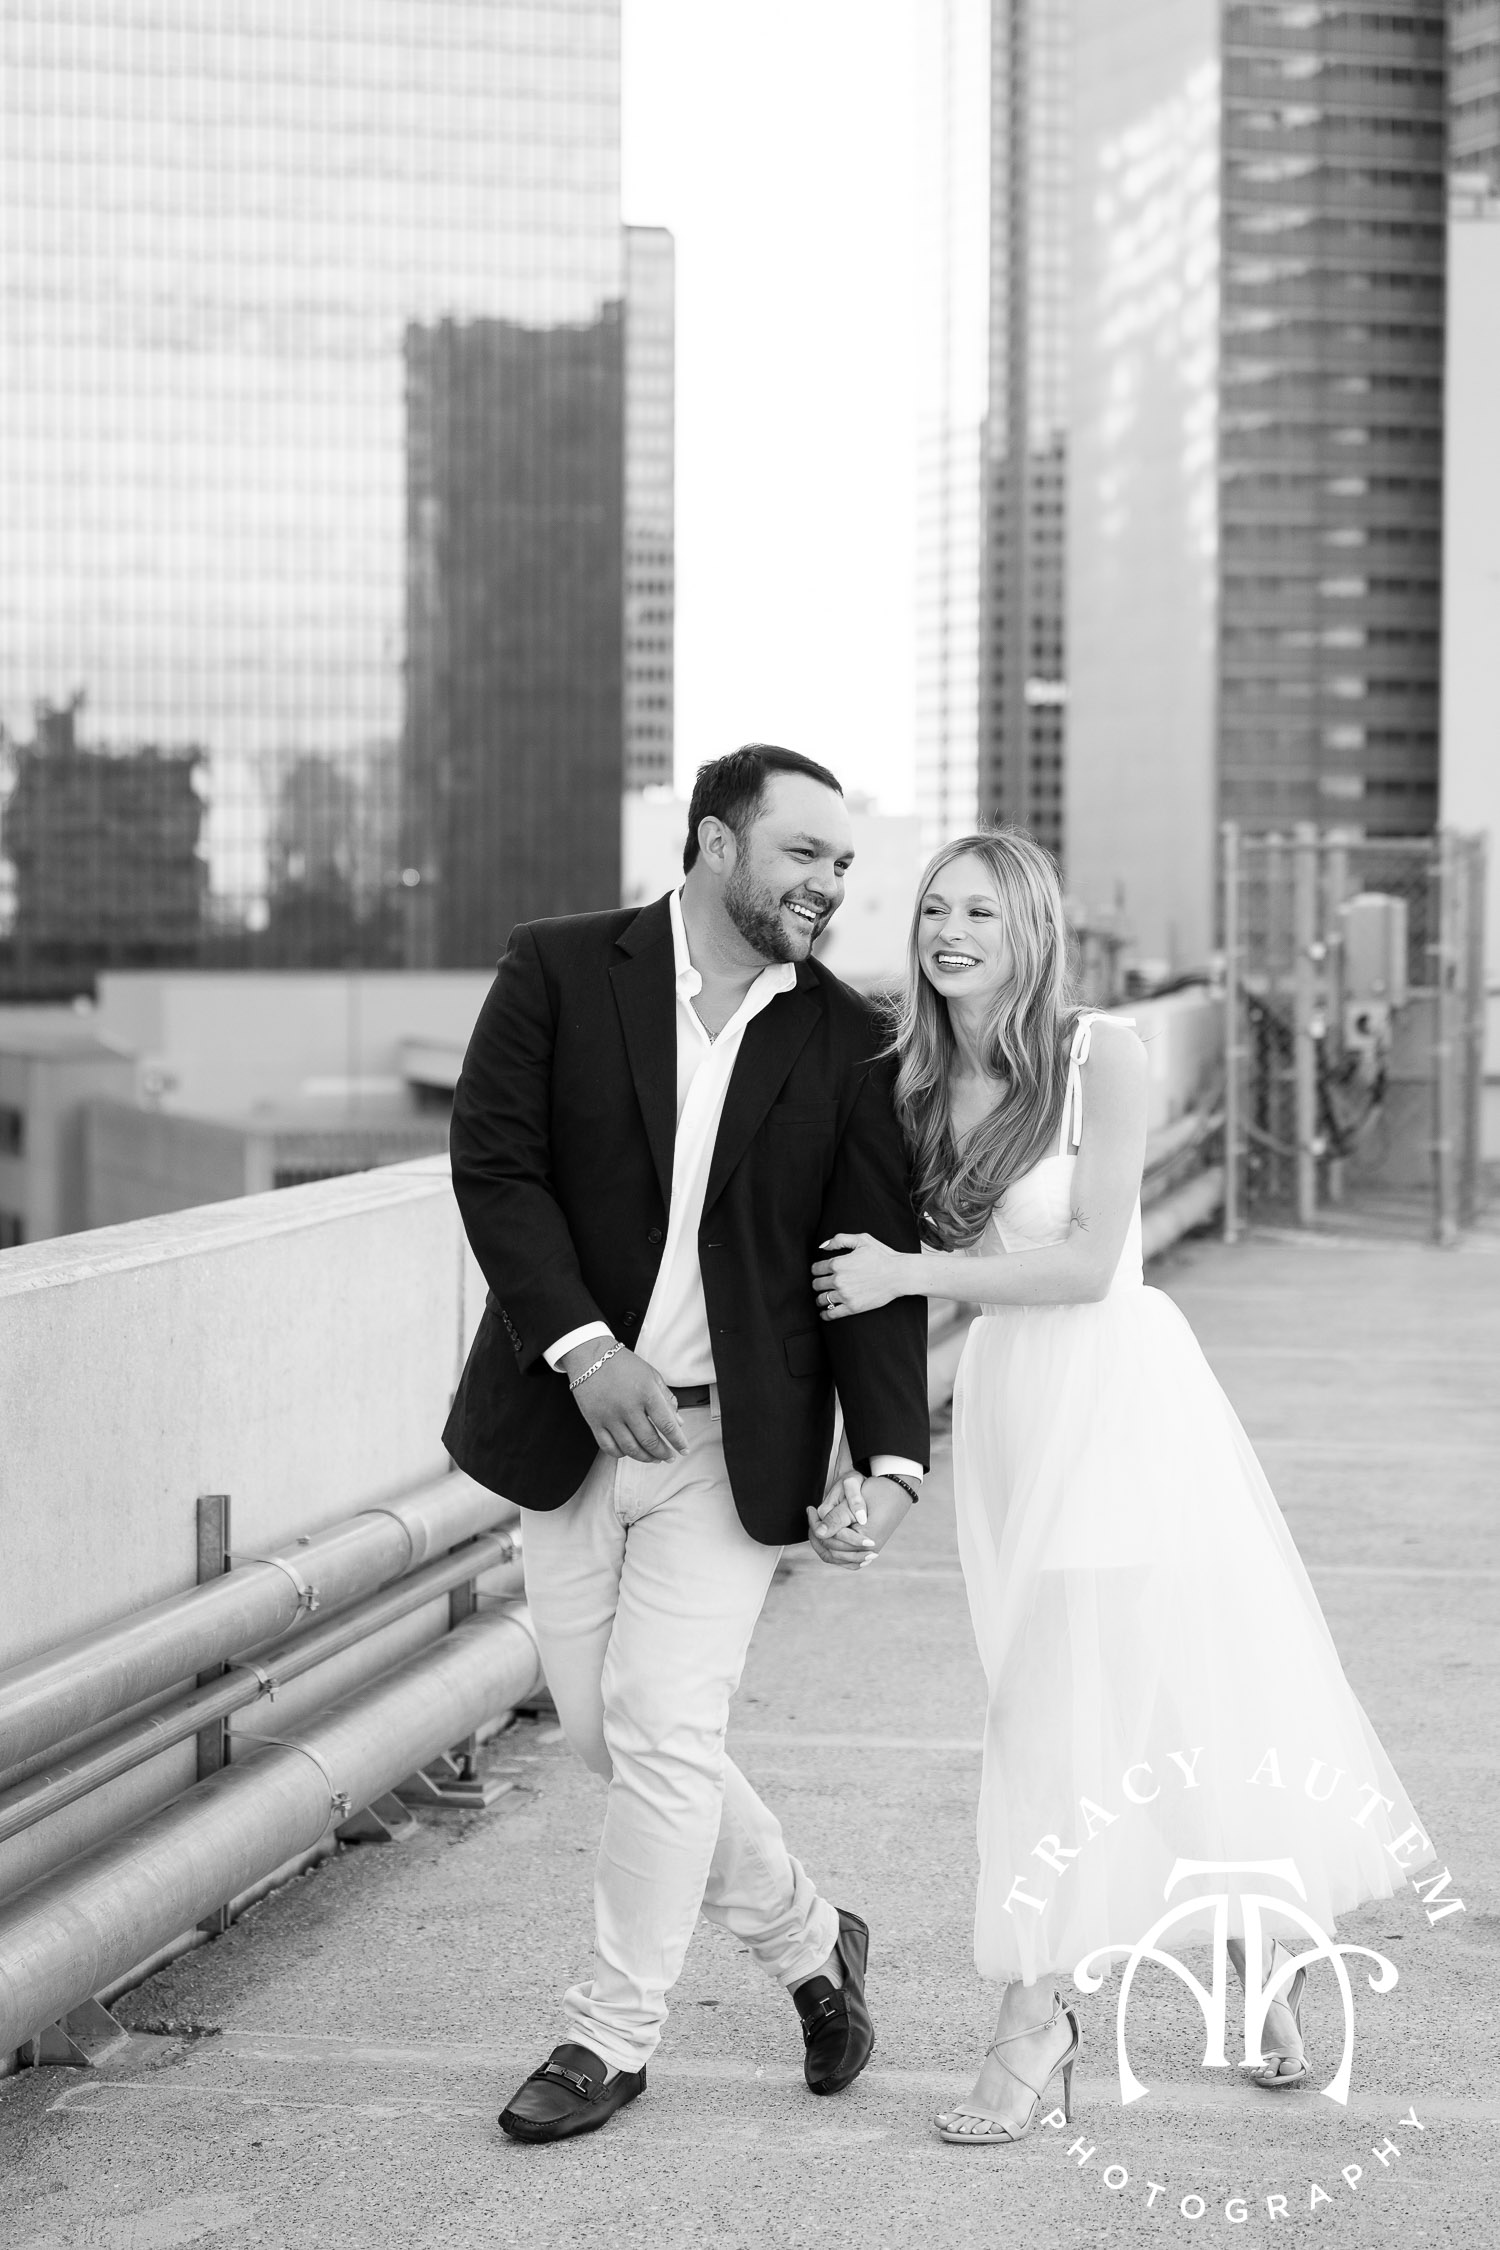 city skyline engagement portrait from parking garage in black and white